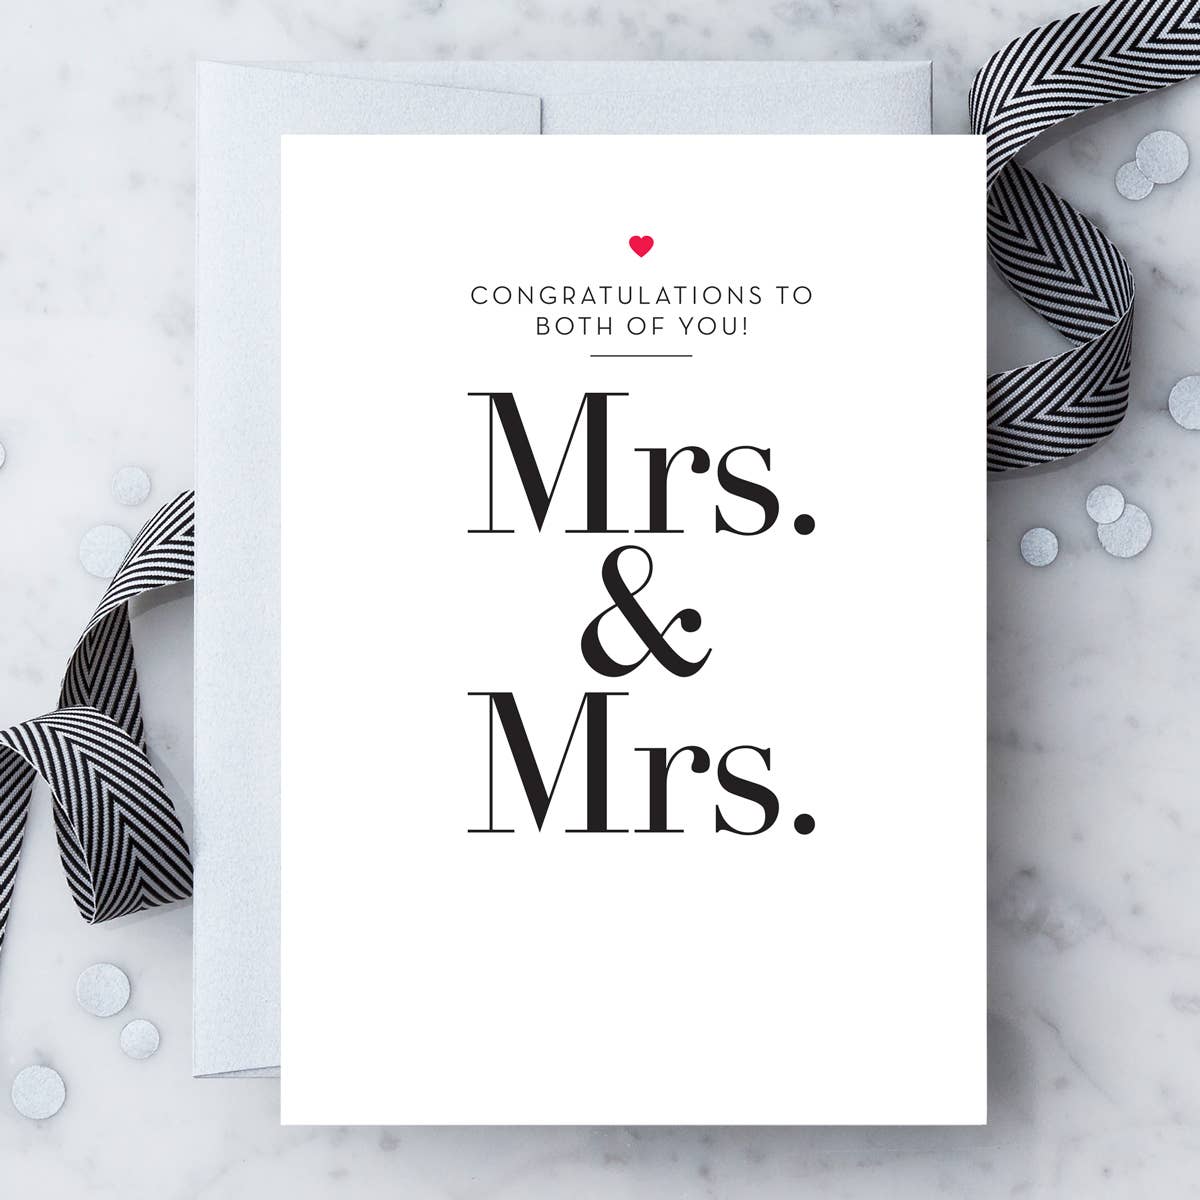 Mrs. & Mrs. - Congratulations To Both Of You - Wedding Marriage Greeting Card - Mellow Monkey